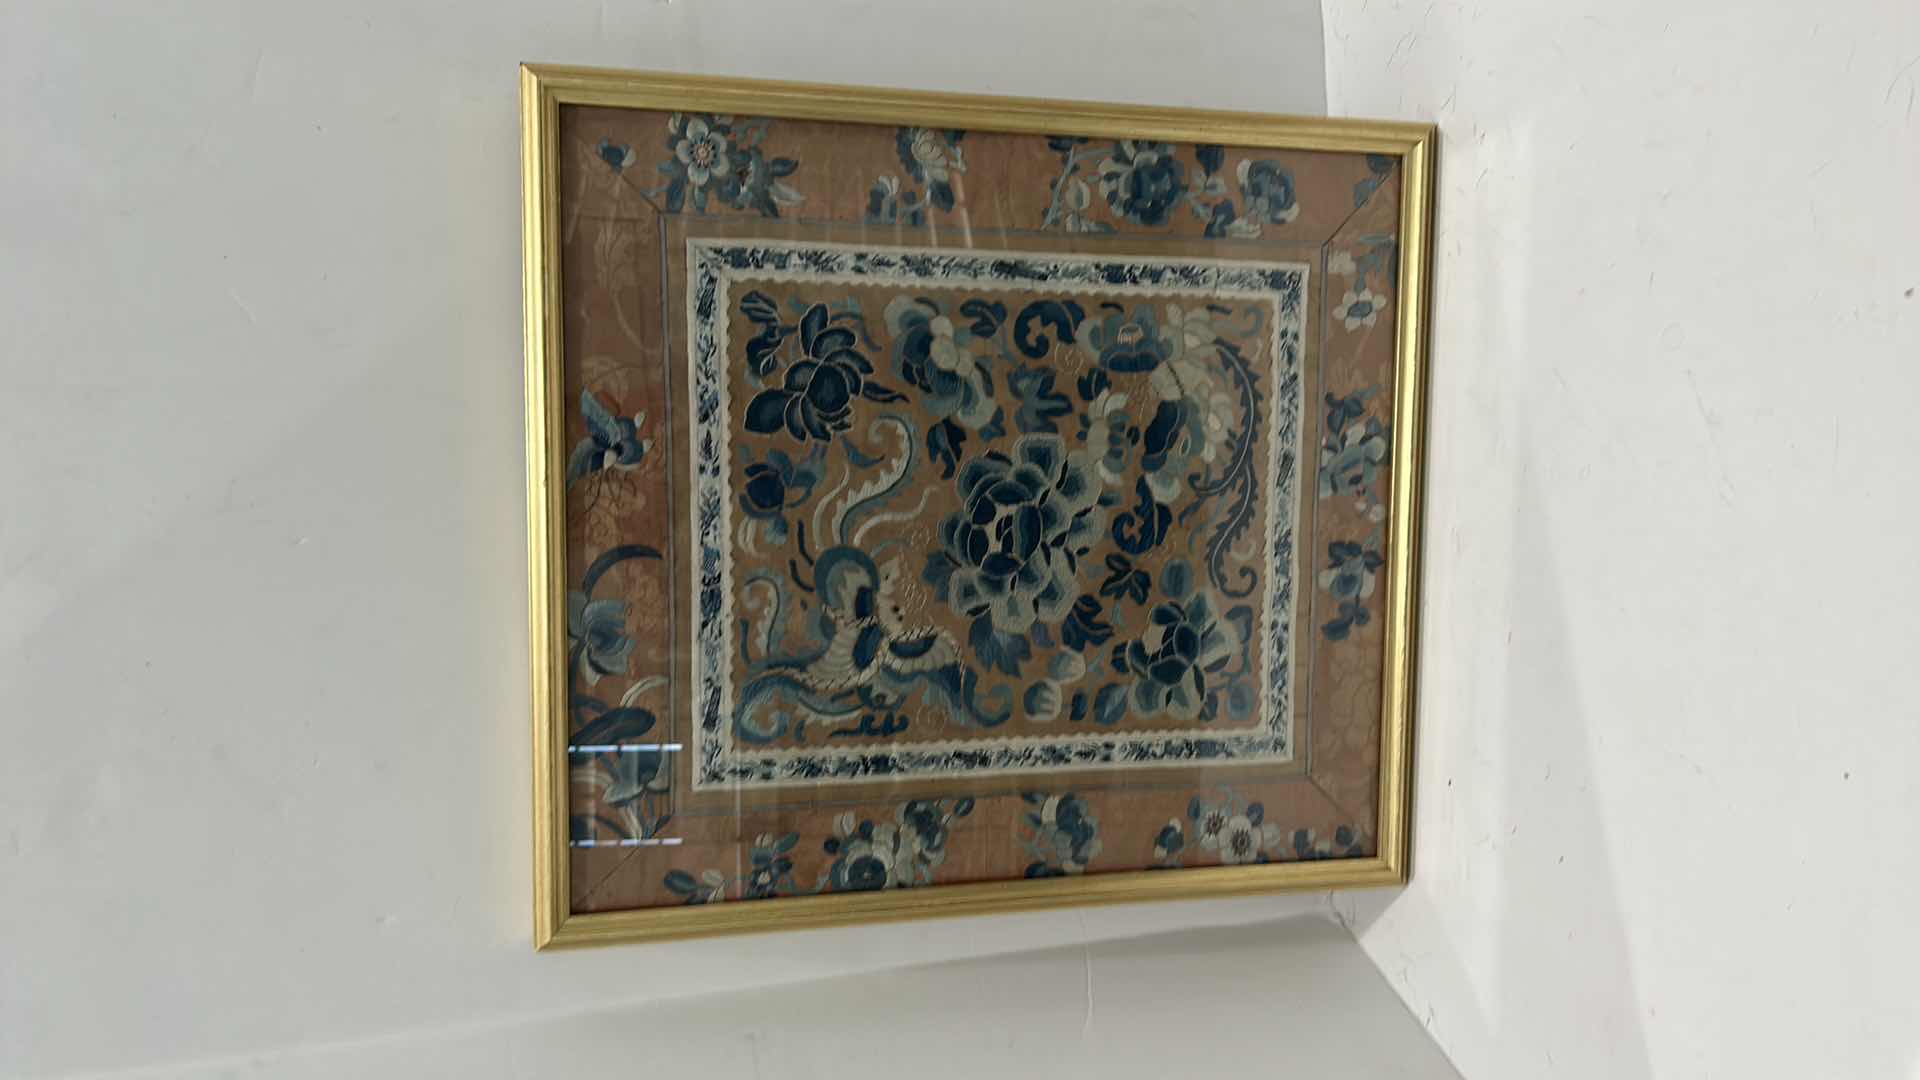 Photo 5 of ANTIQUE CHINESE TEXTILE FABRIC, SILK WITH SILK THREAD HAND EMBROIDERY ARTWORK FRAMED 16 1/2” x 18 1/2”